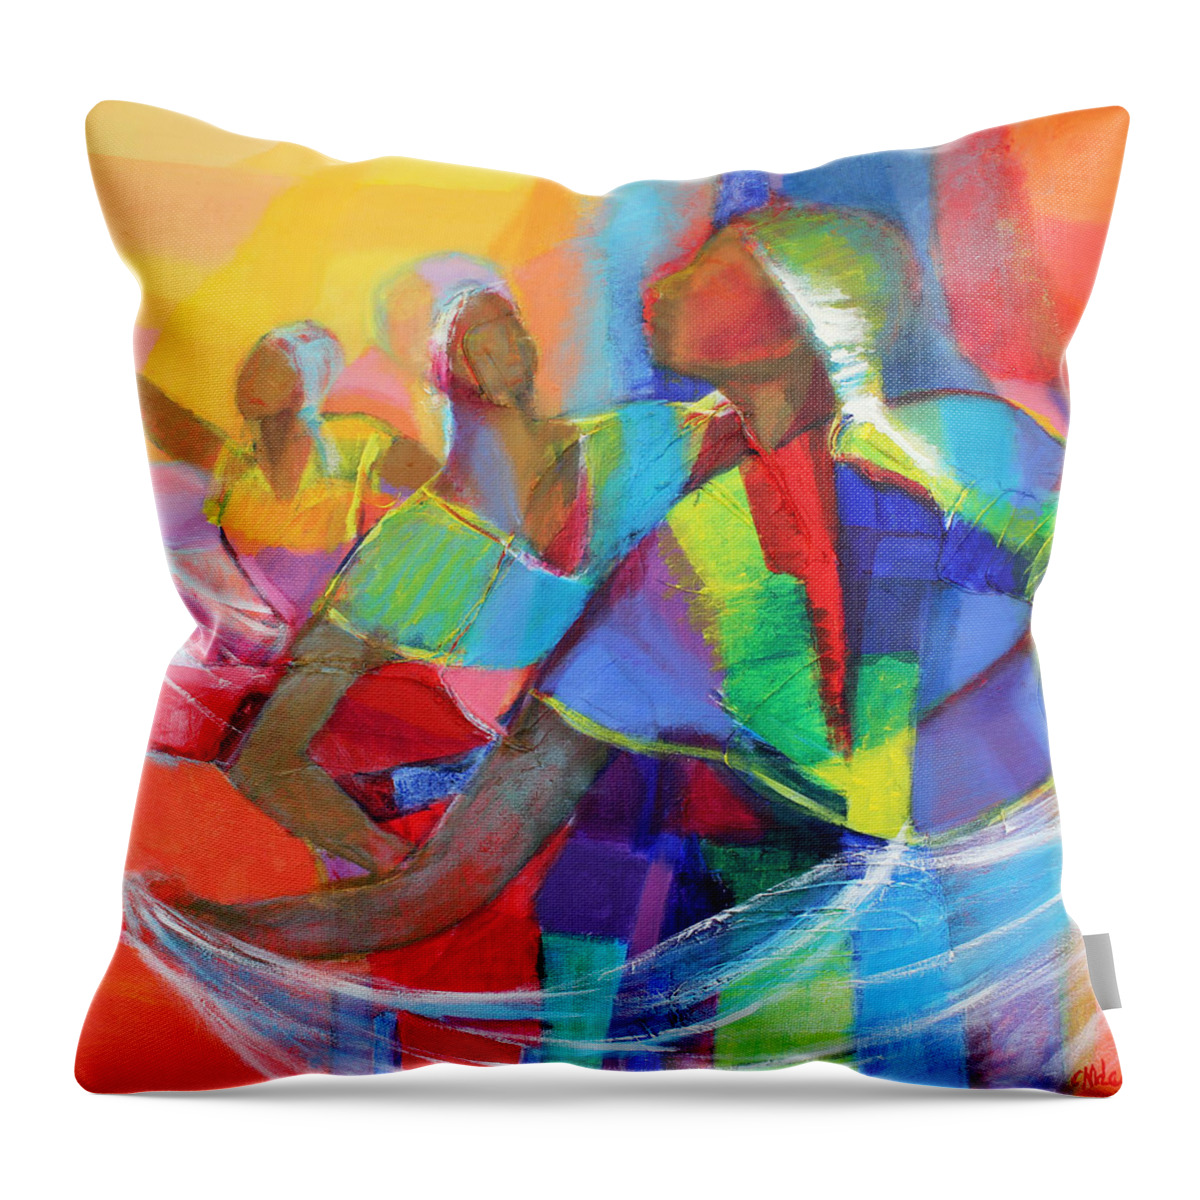 Cynthia Throw Pillow featuring the painting Belle Dancers II by Cynthia McLean